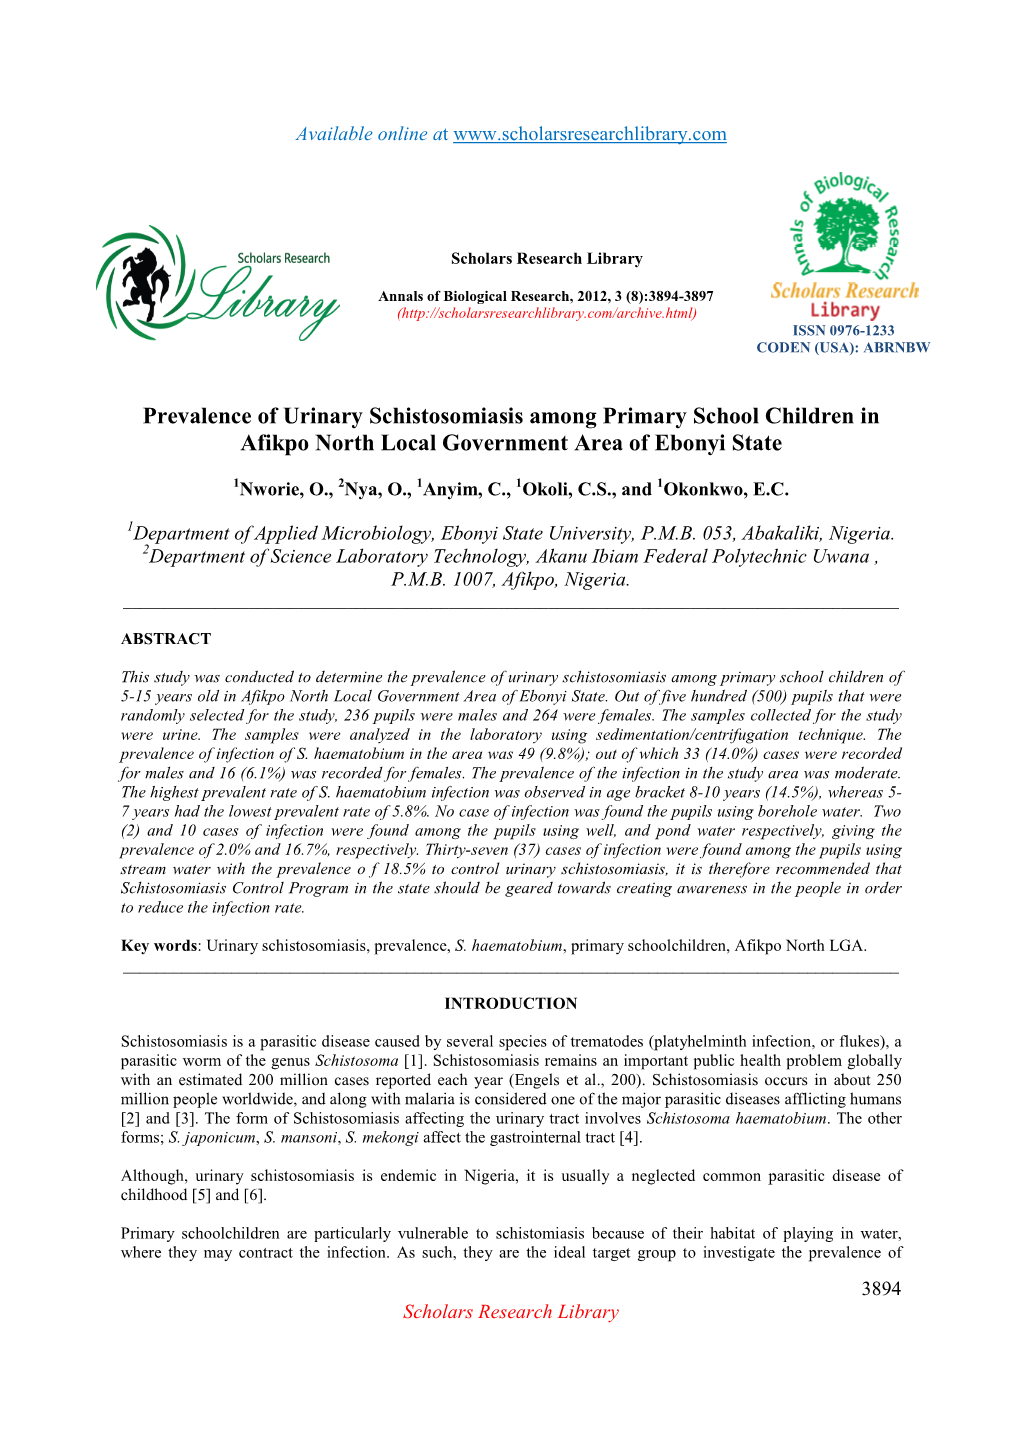 Prevalence of Urinary Schistosomiasis Among Primary School Children in Afikpo North Local Government Area of Ebonyi State